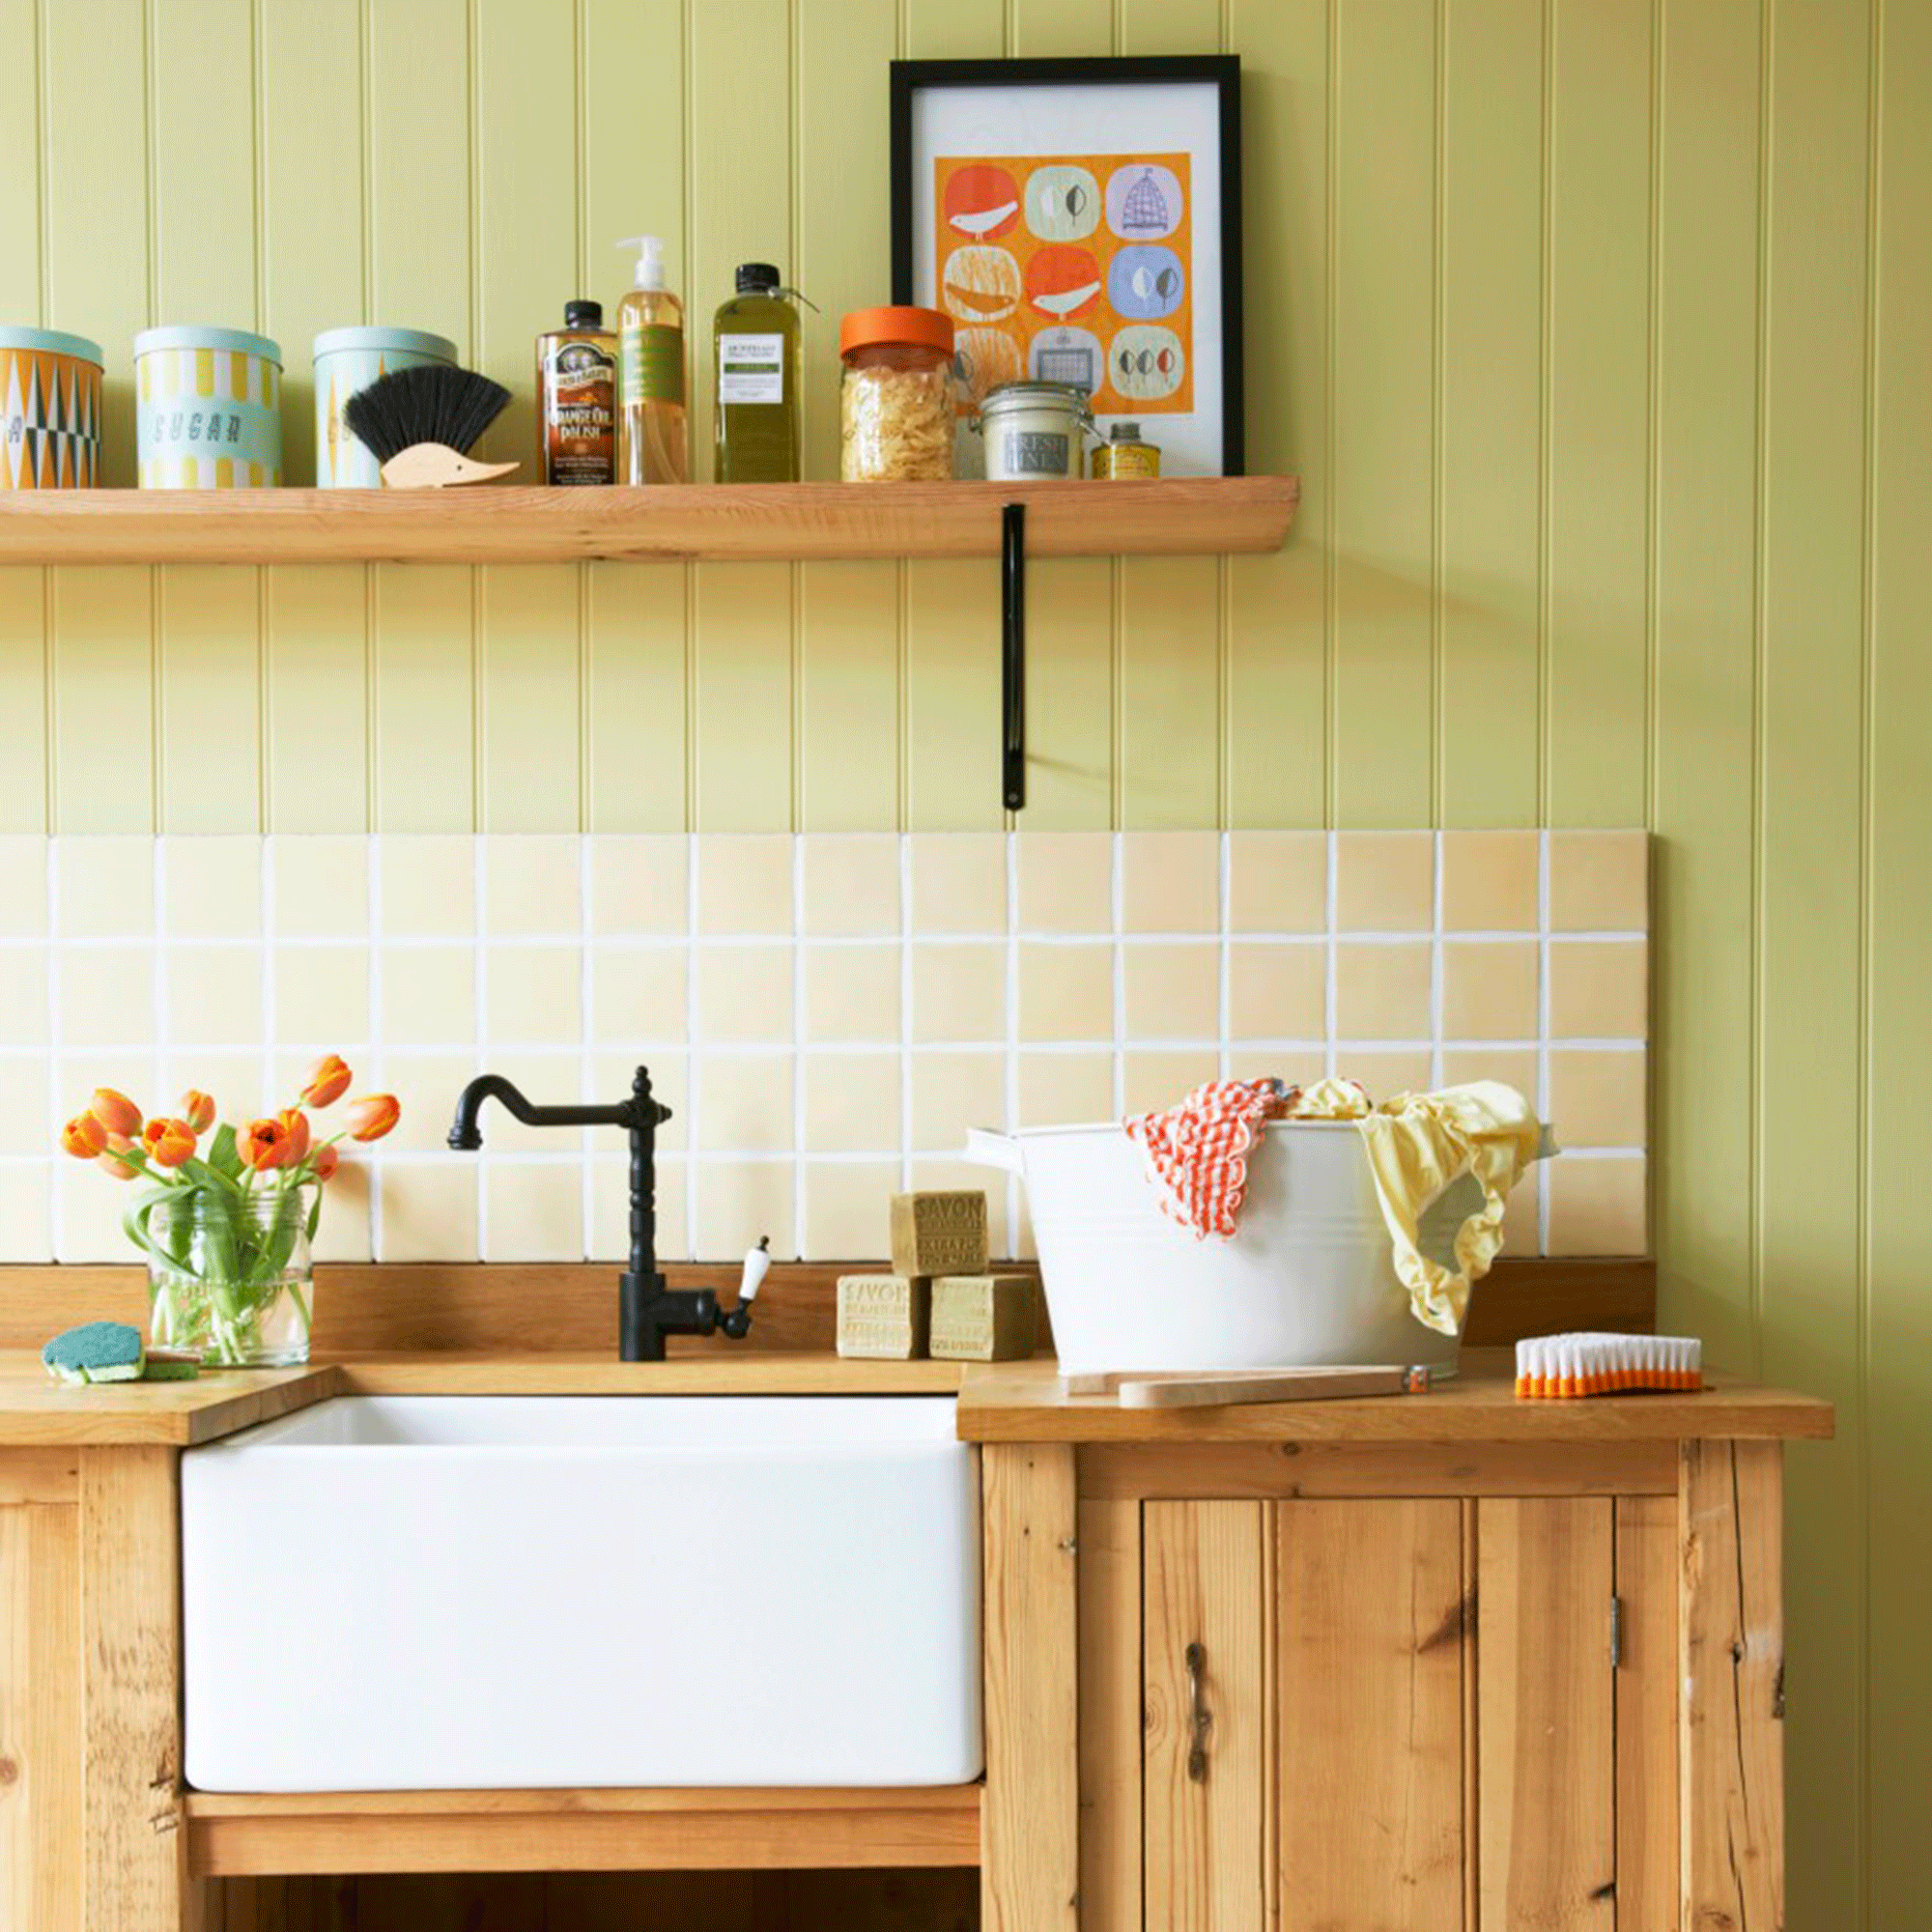 Green and yellow utility room with wooden features